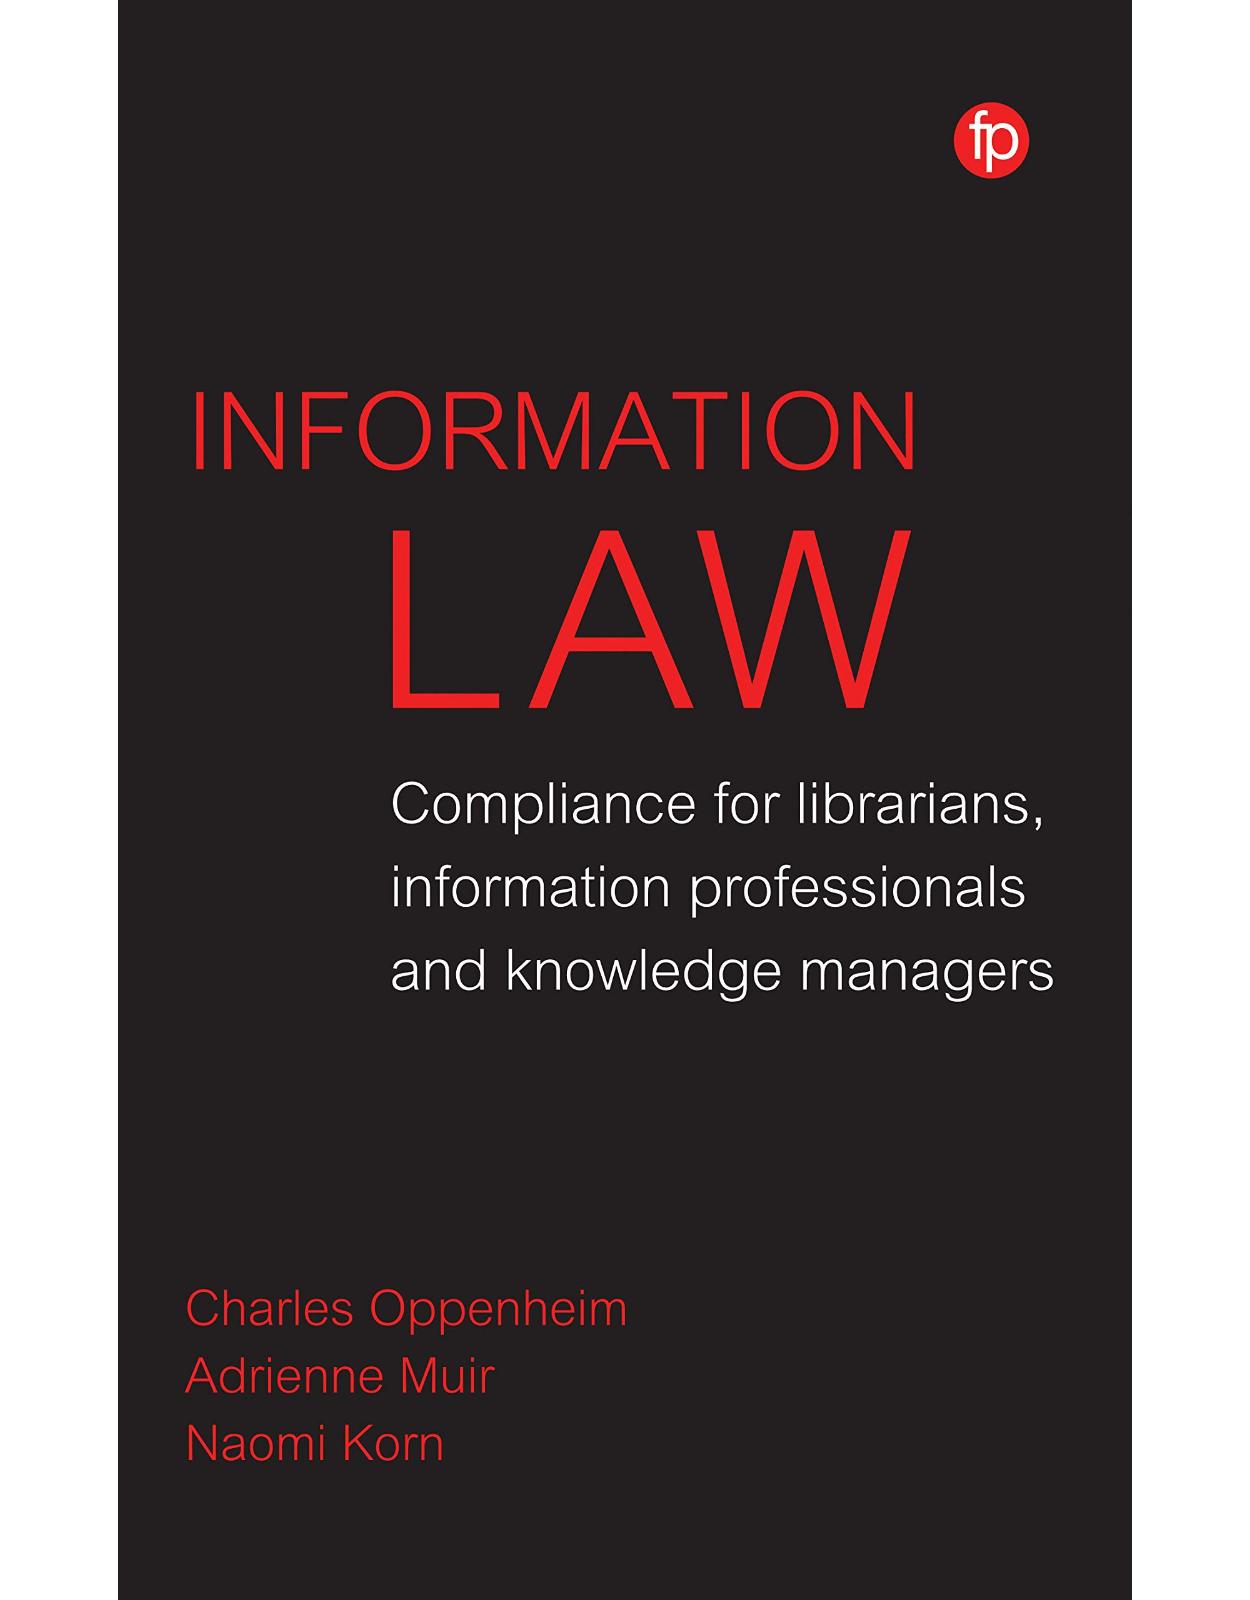 Information Law: Compliance for librarians, knowledge managers and information professionals